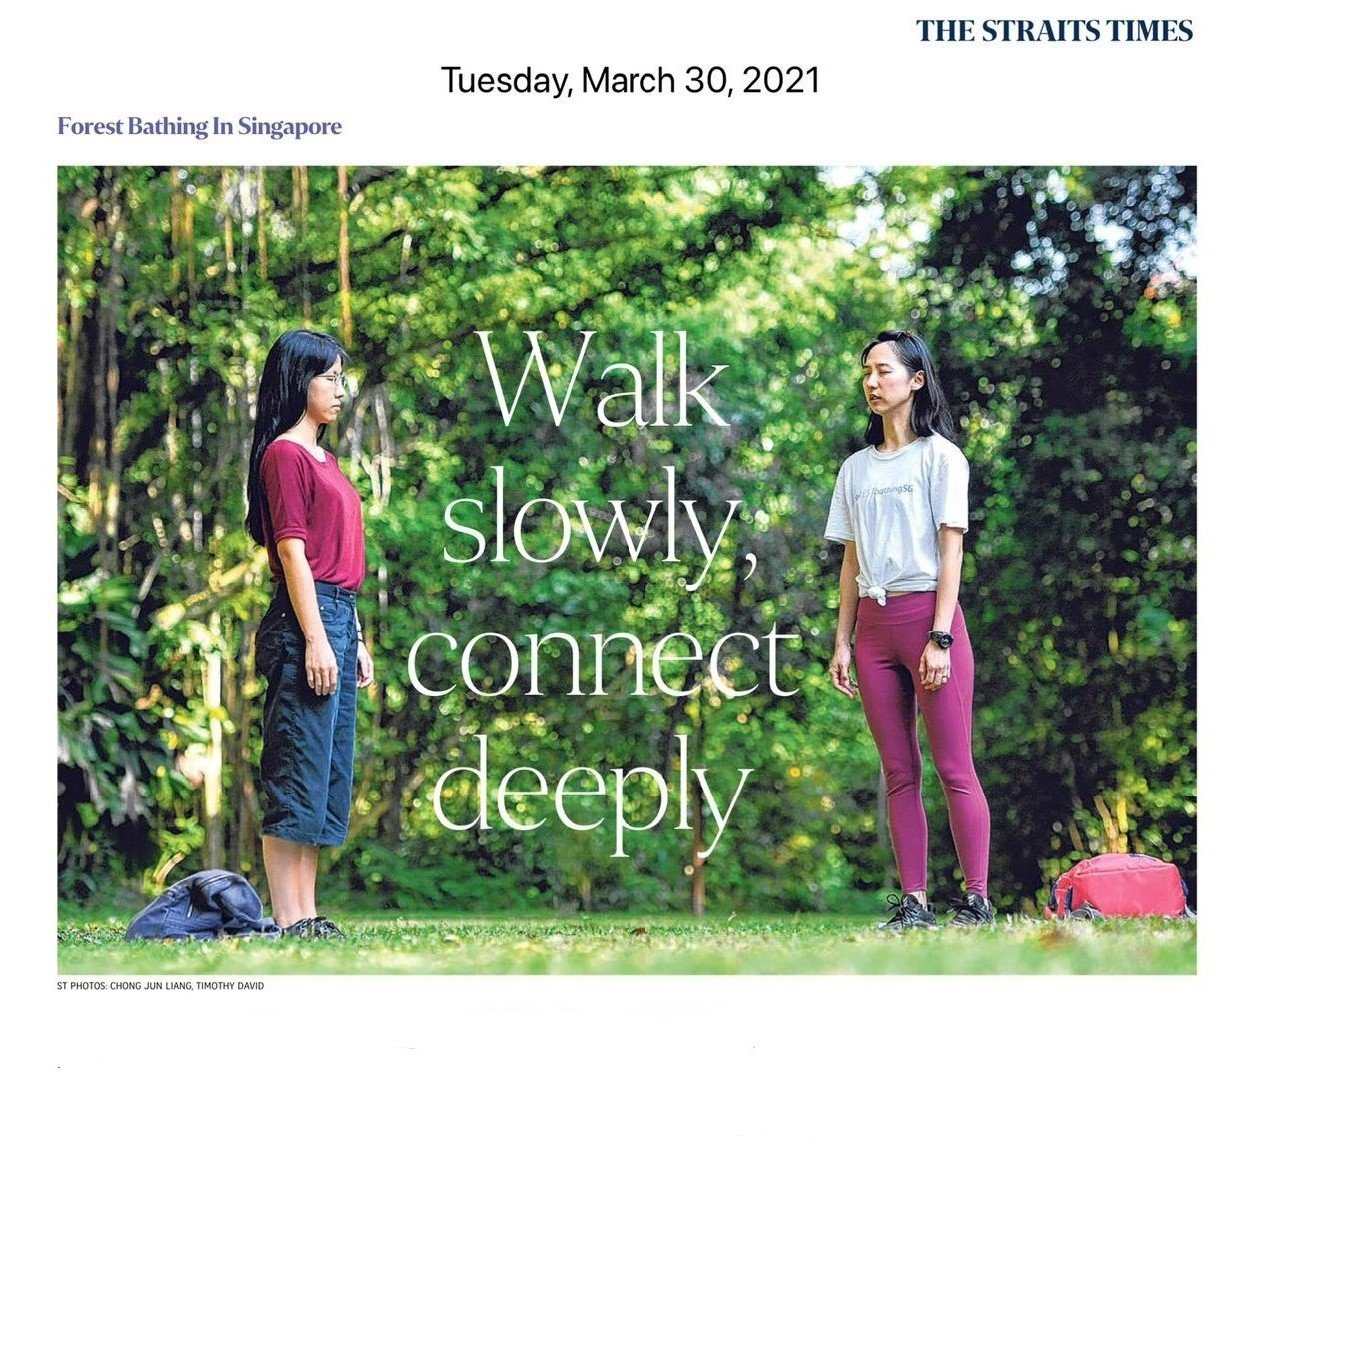 Forest bathing feature with The Straits Times